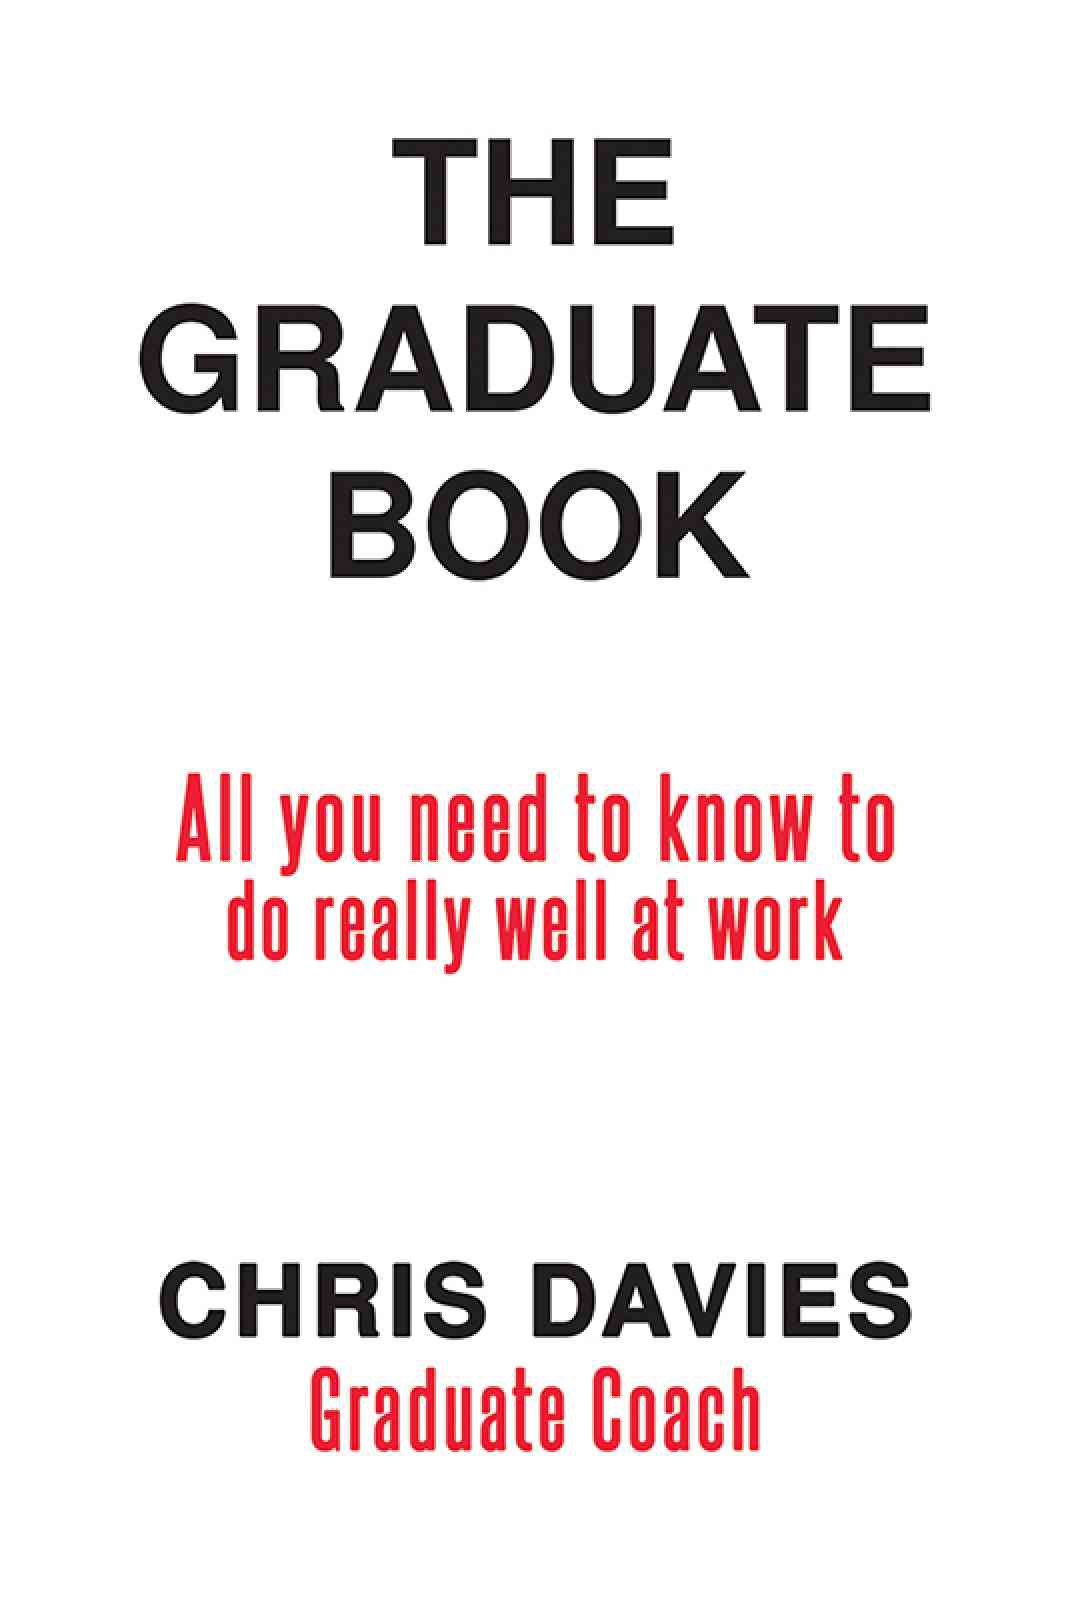 Chris Davies of ‘The Graduate Book’ & ‘The Student Book’ features a YouTube Video